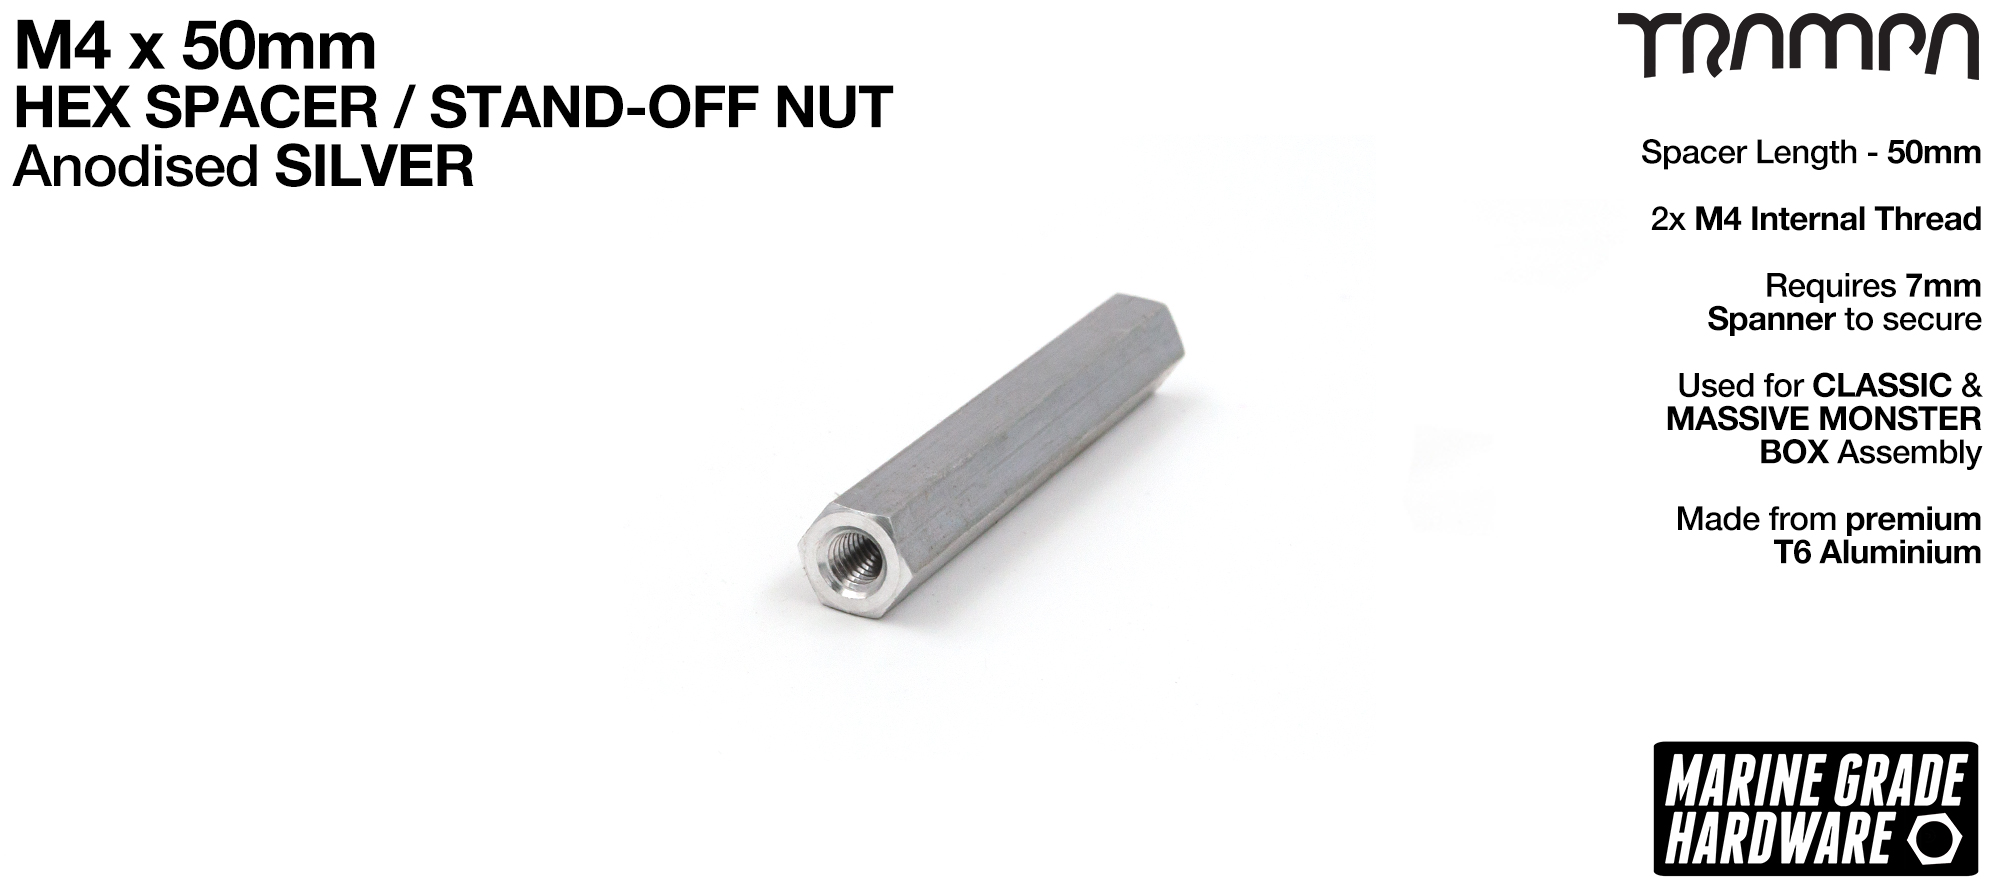 M4 x 50mm Aluminium Threaded HEX Spacer Nut used for assembling the MONSTER Battery Boxes - SILVER